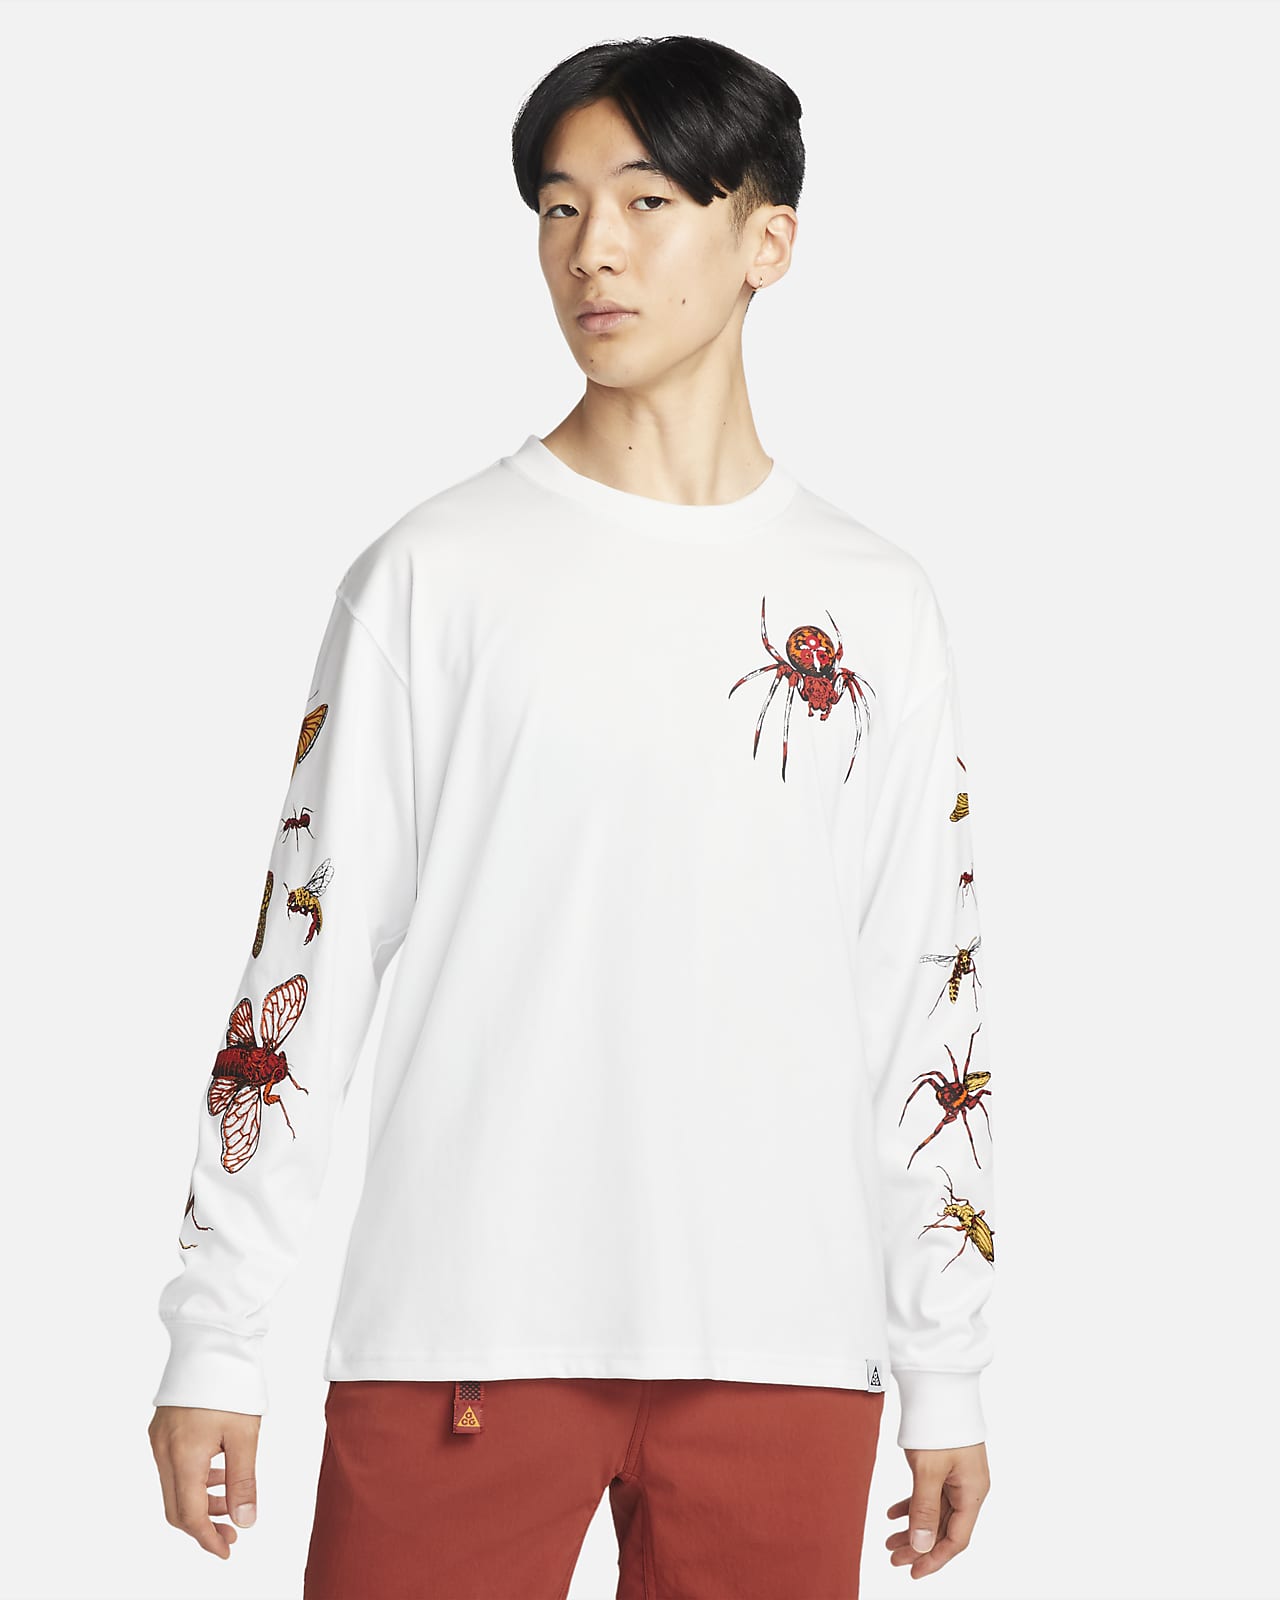 Nike ACG "Insects" Men's Long-Sleeve T-Shirt